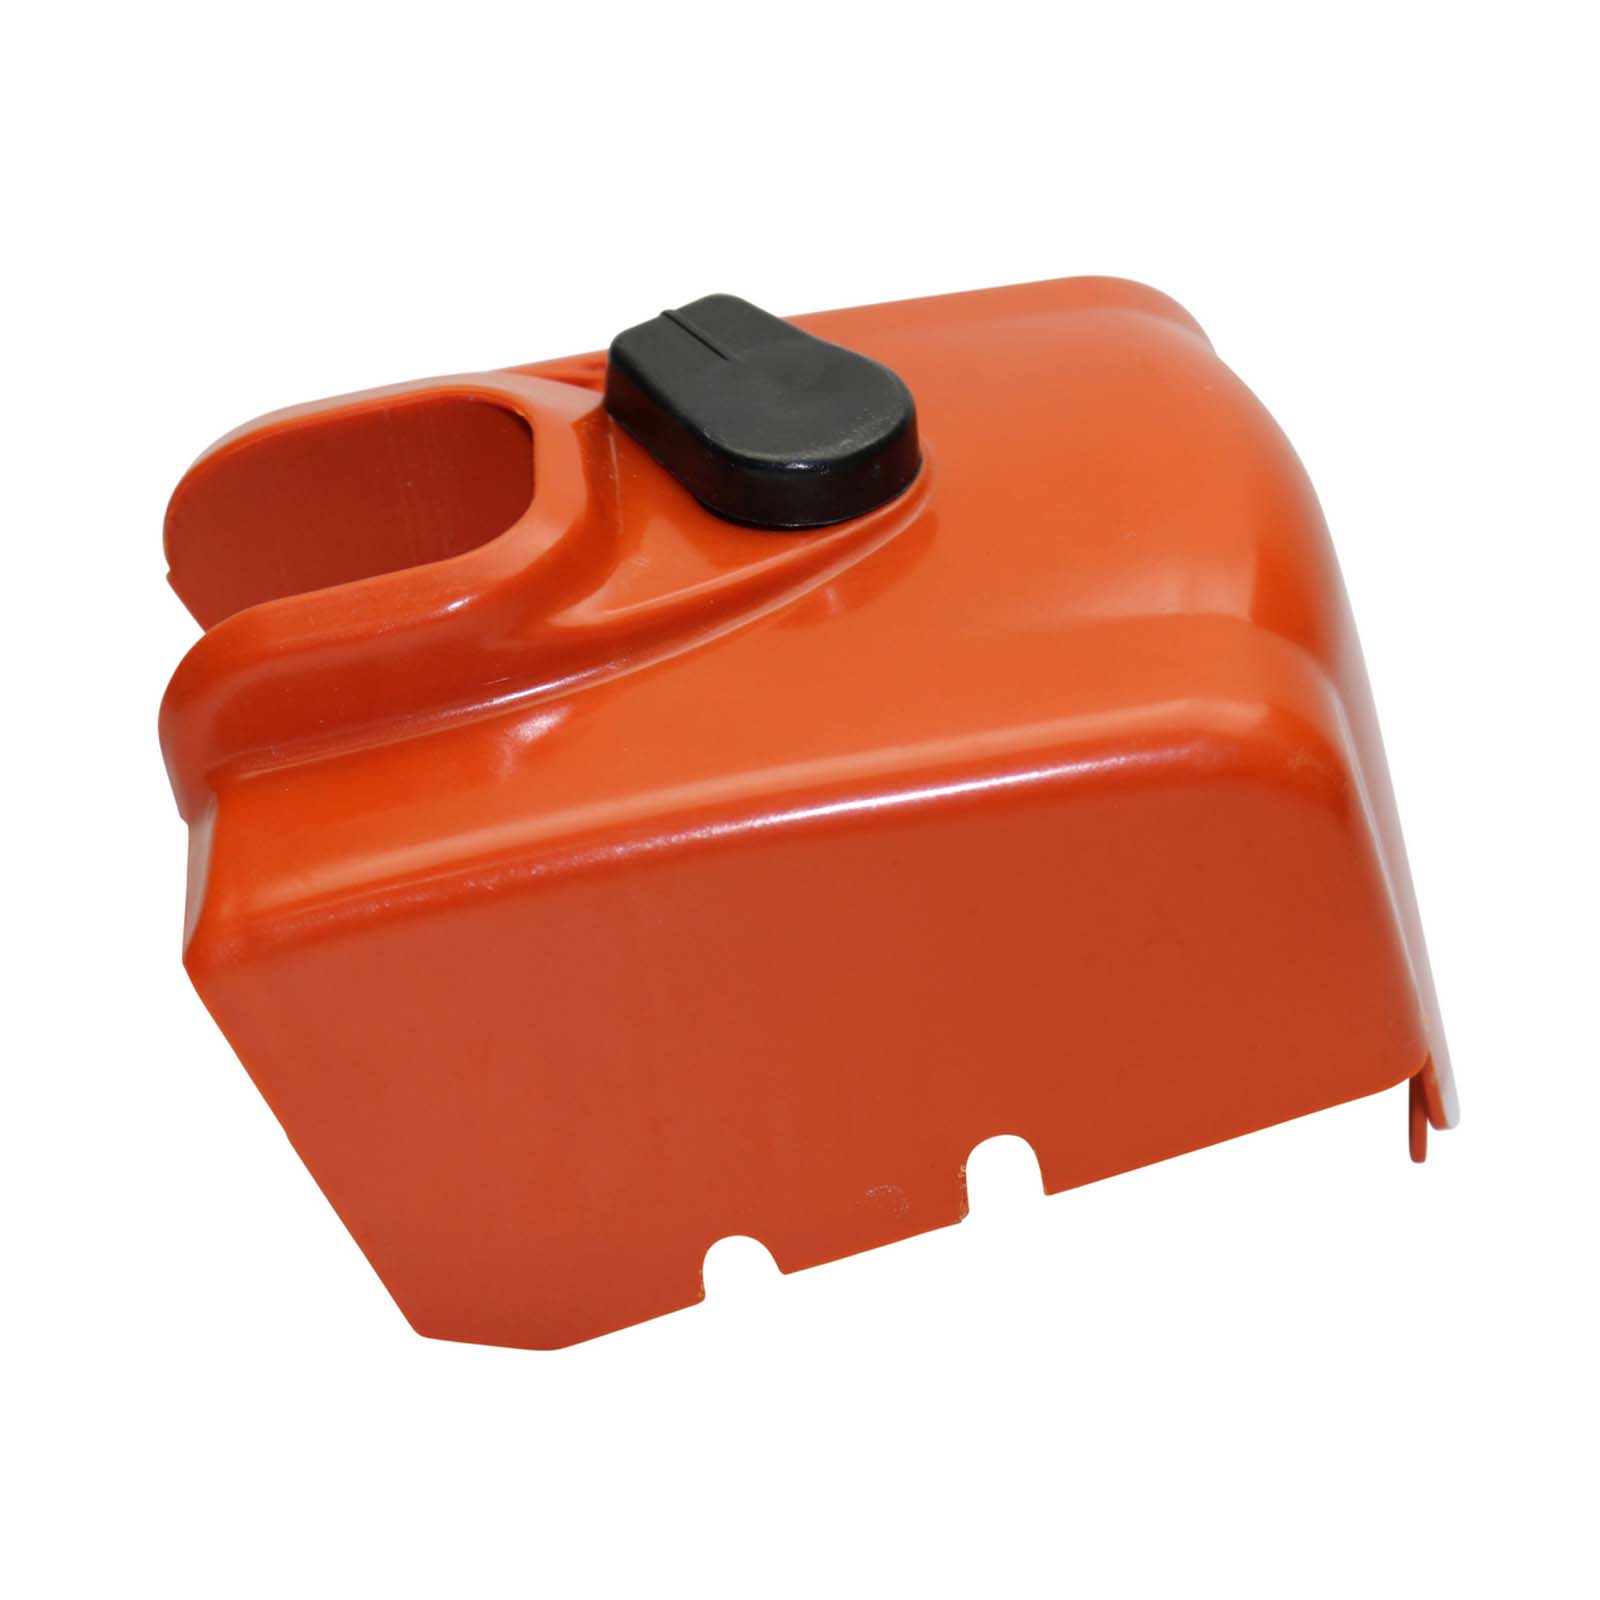 Air Fuel Filter Air Filter cover For Stihl 021 023 025 MS 210 230 MS250 Chainsaw